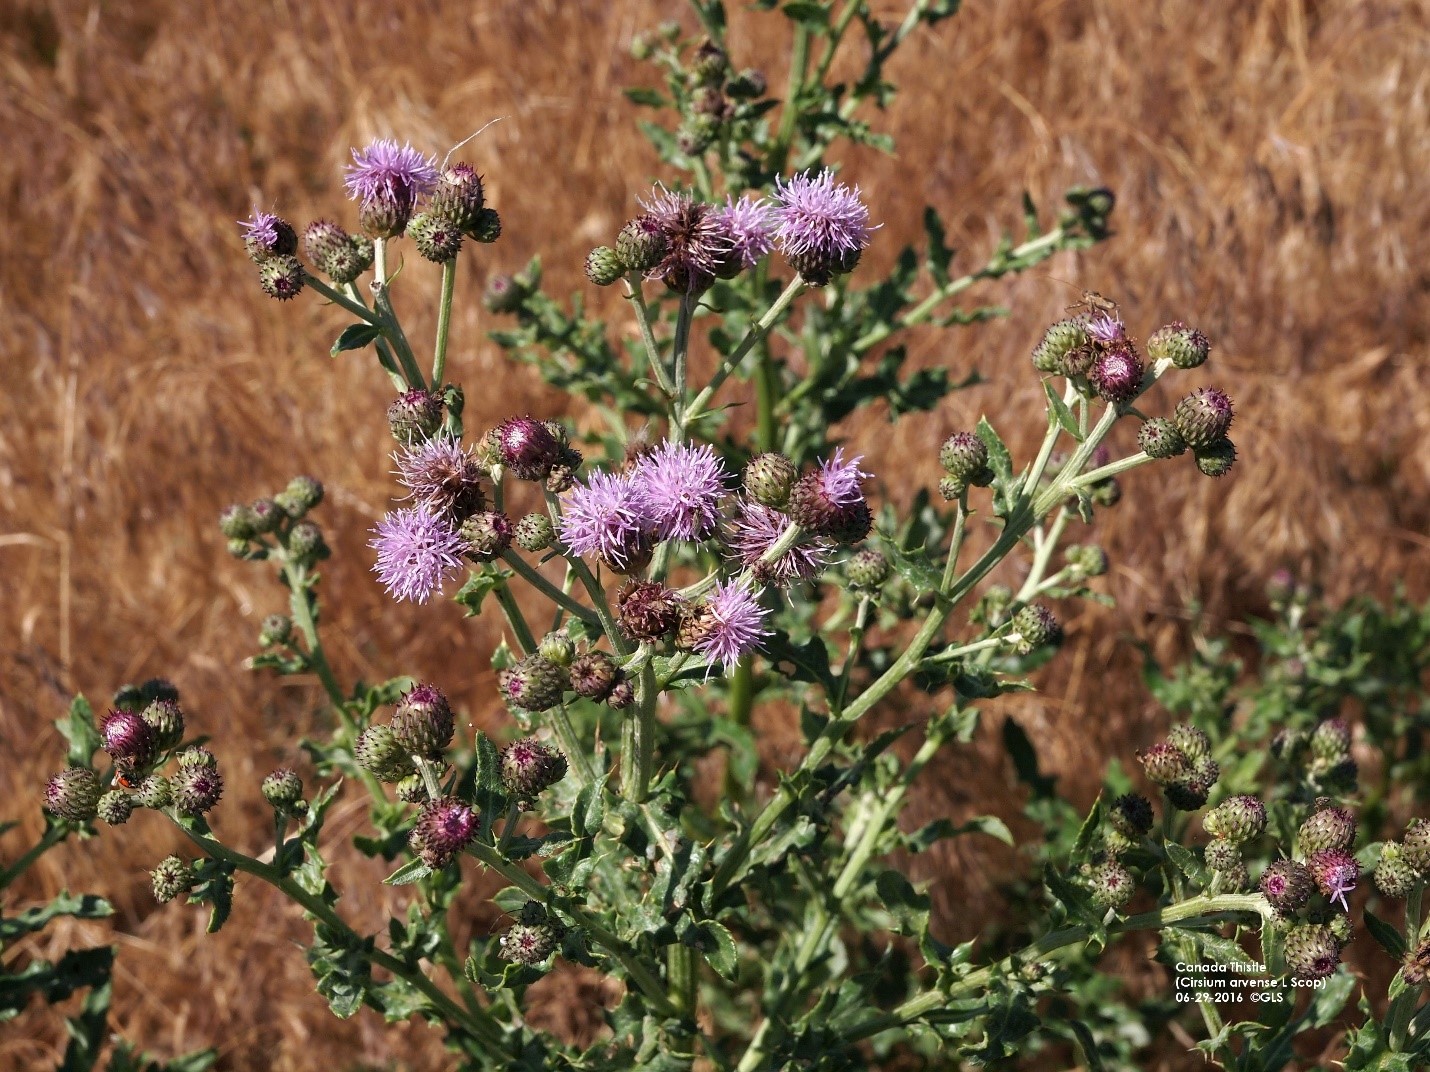 Canada thistle in flowering stage